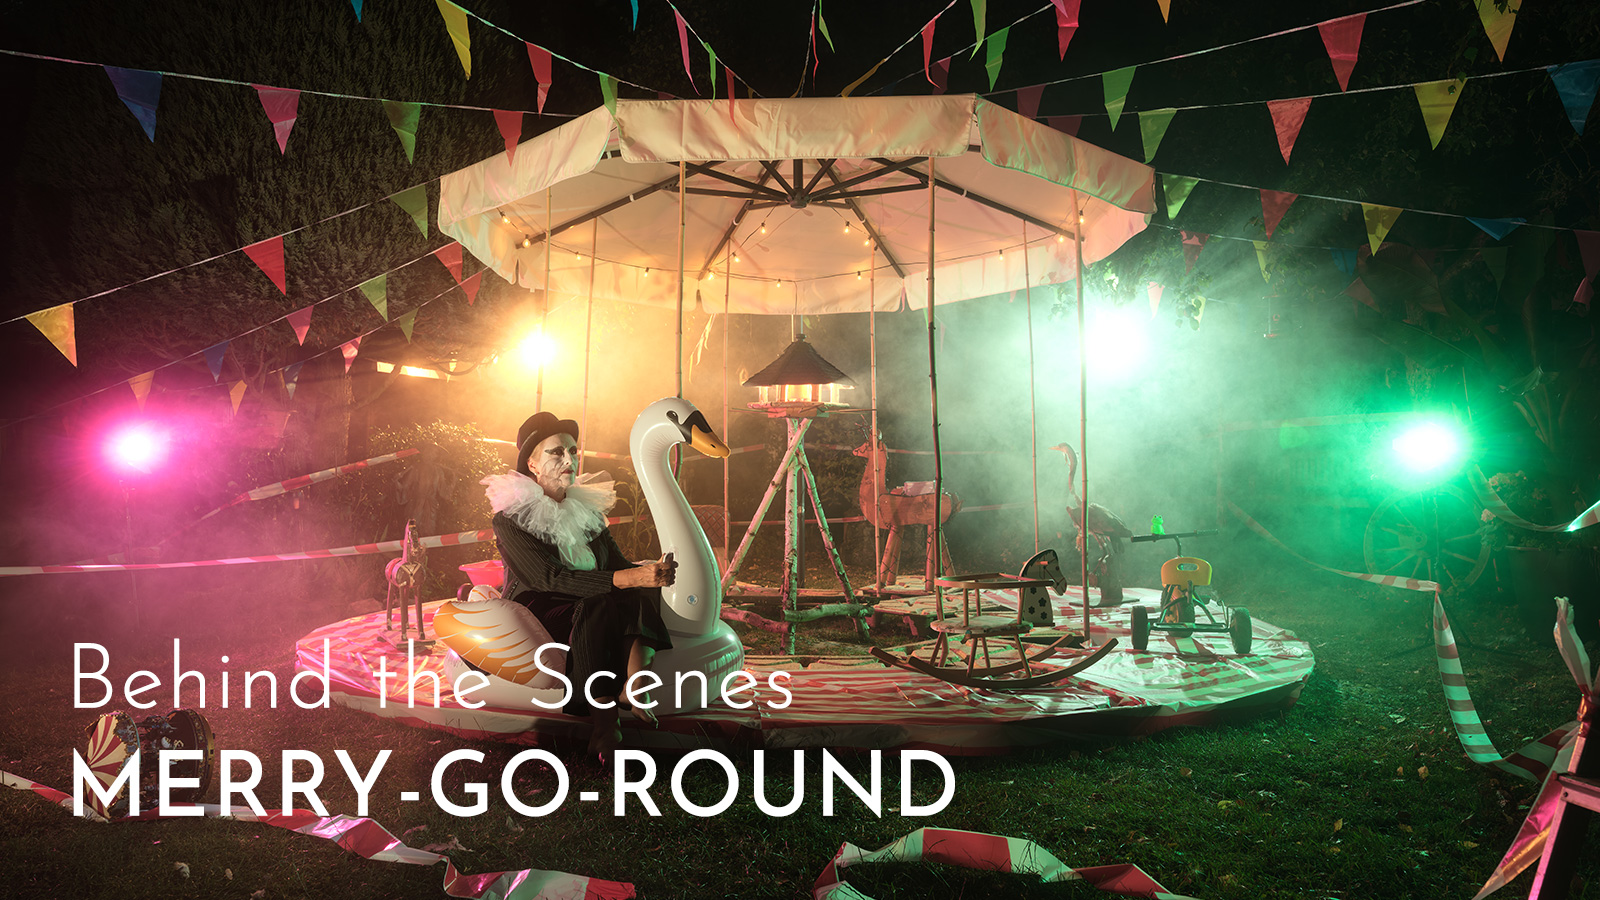 Seb Agnew | Merry-Go-Round – Behind the Scenes